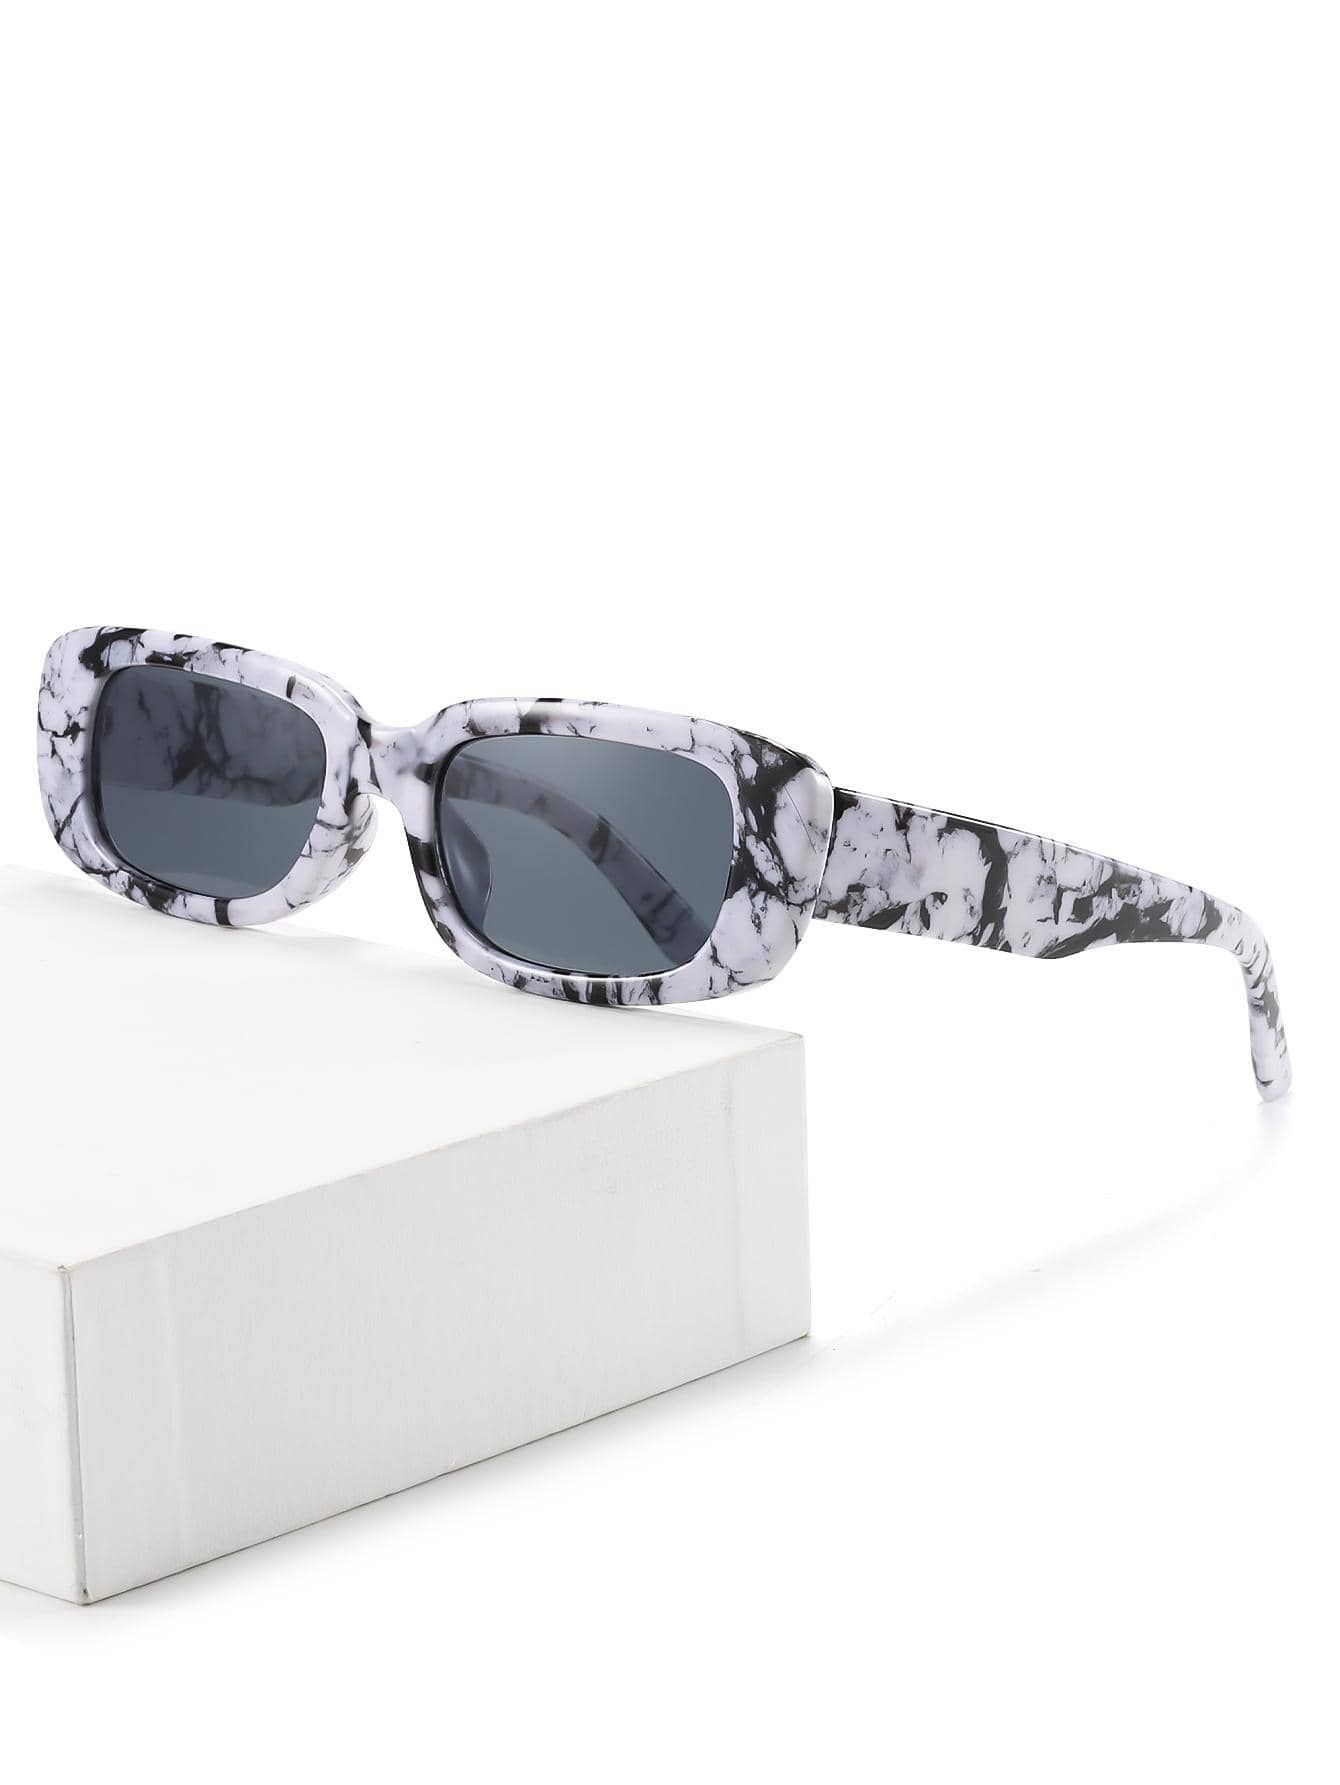 1pair Unisex Marble Pattern Square Frame Fashion Sunglasses For Summer | SHEIN